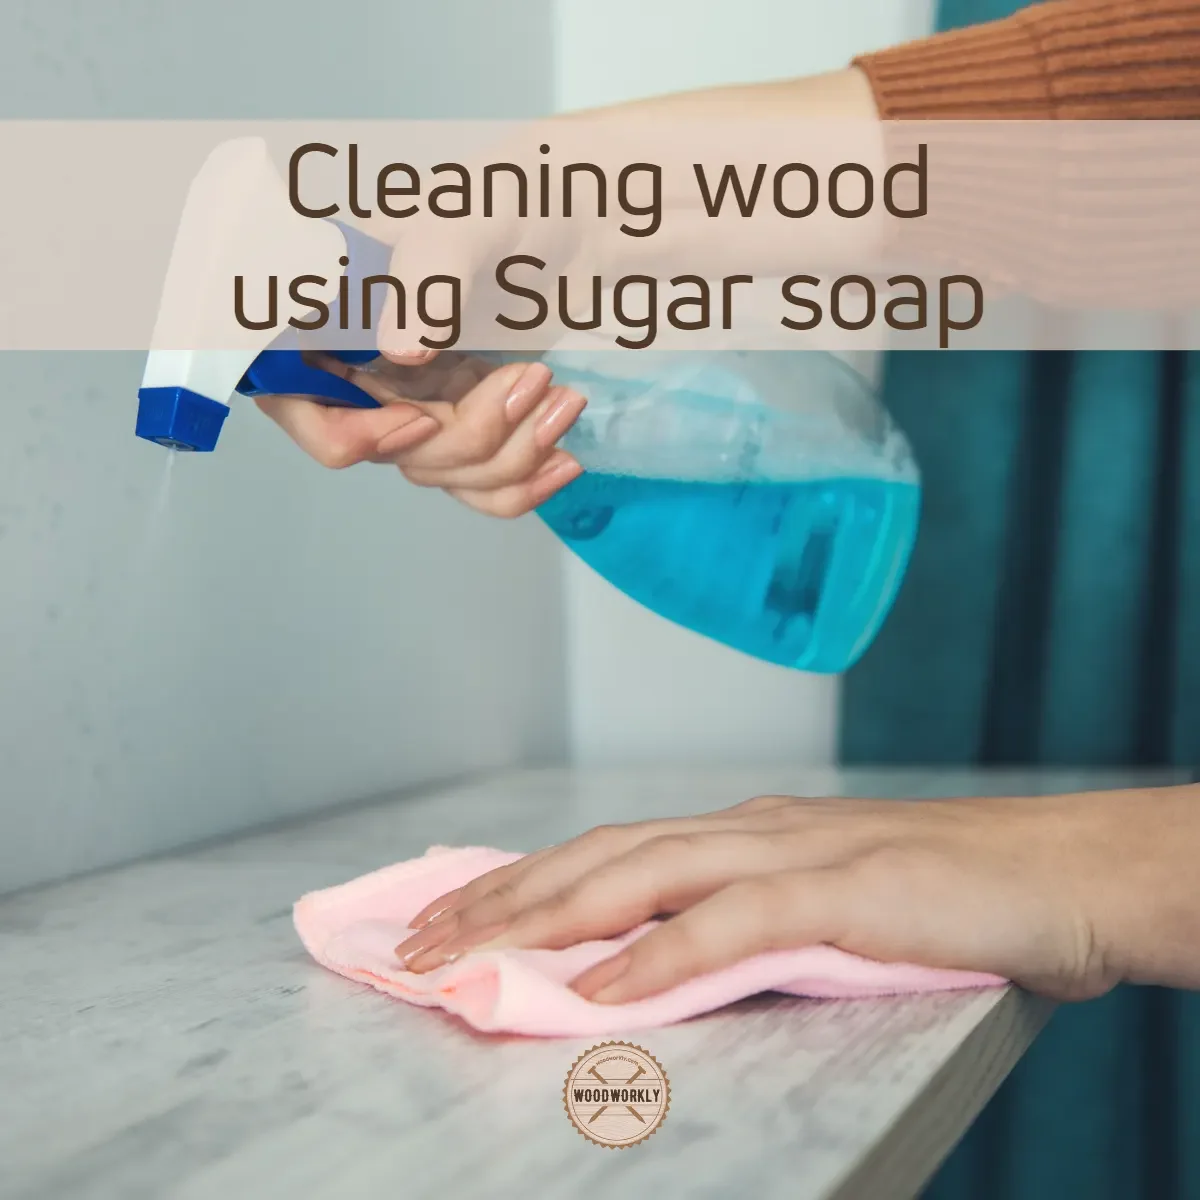 Cleaning wood using Sugar soap